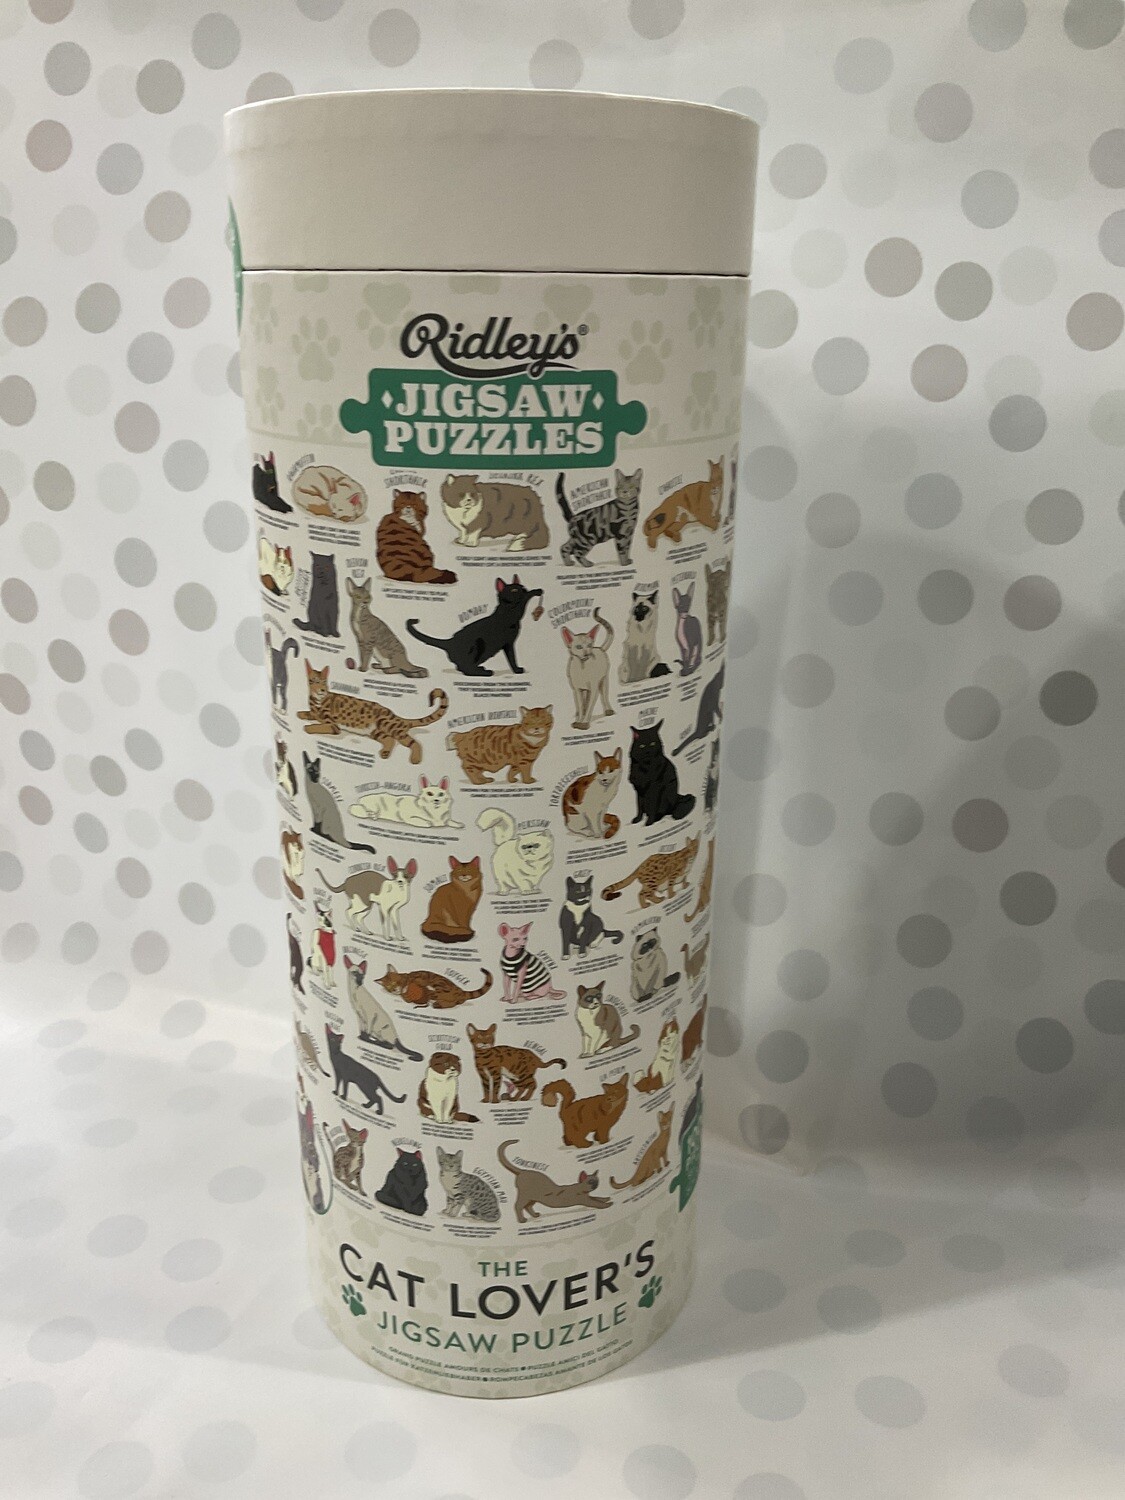 Ridley’s Jigsaw Puzzles - Cat Lover’s